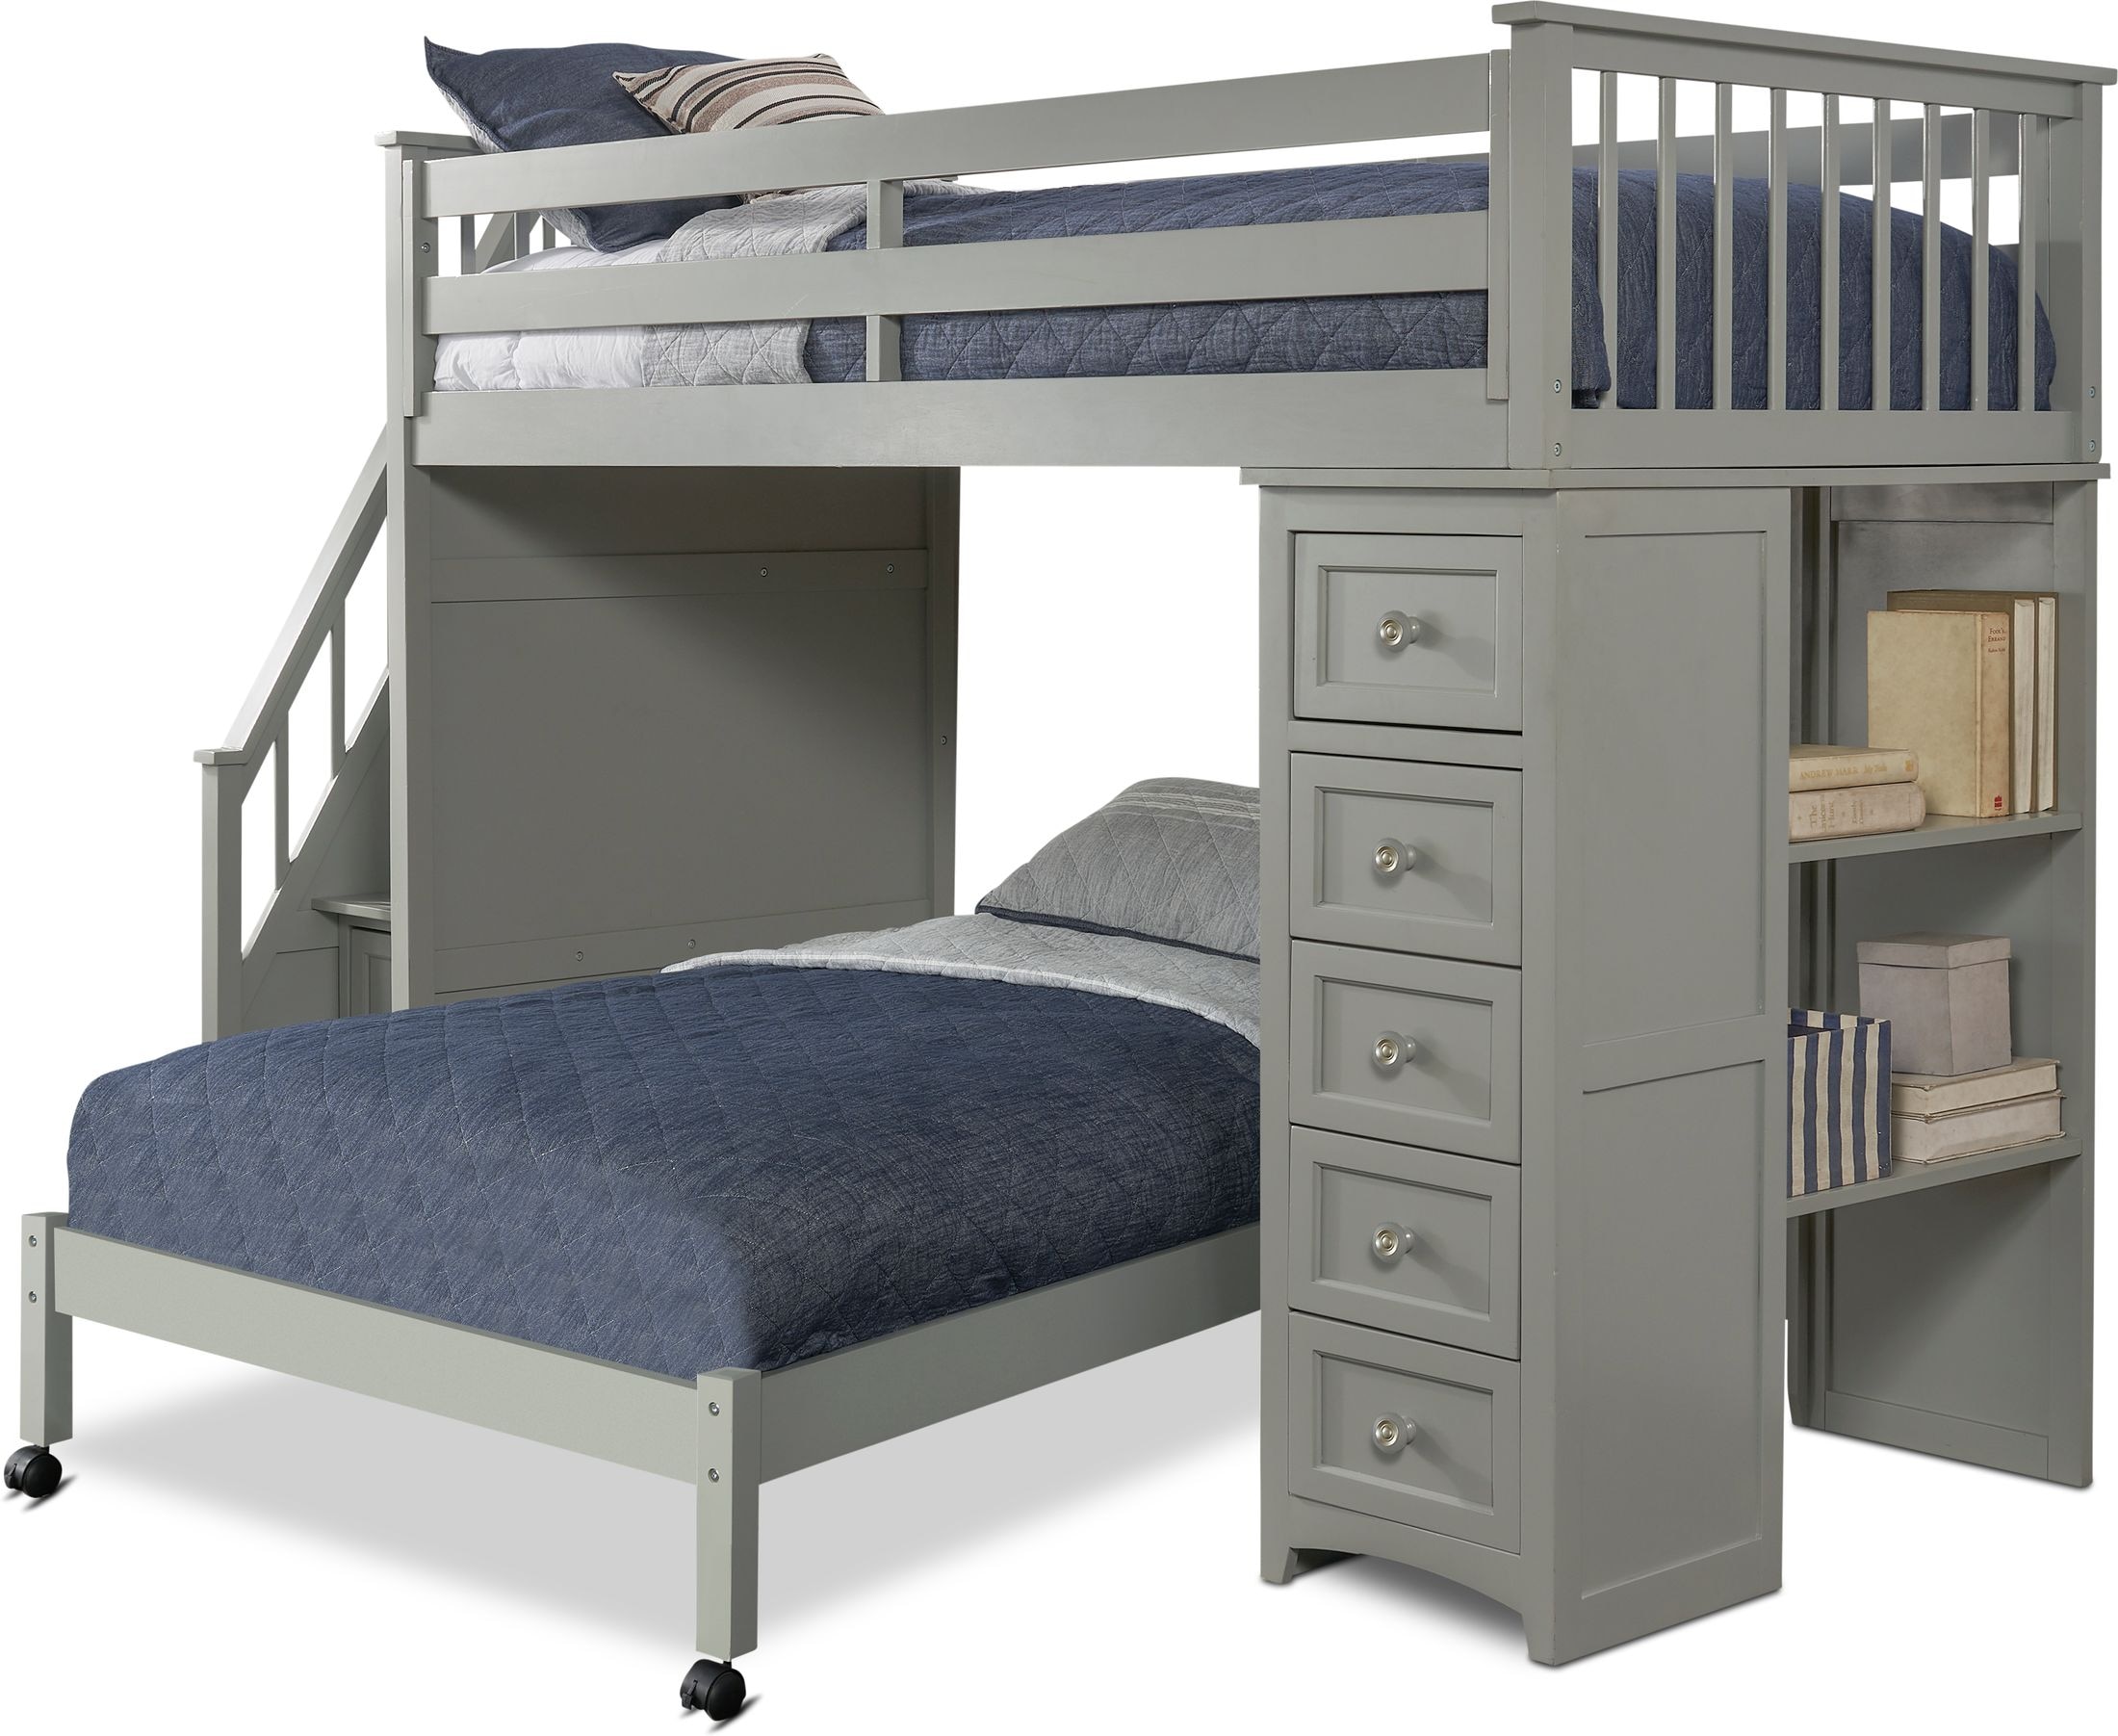 Undefined Value City Furniture, Twin Loft Bunk Bed